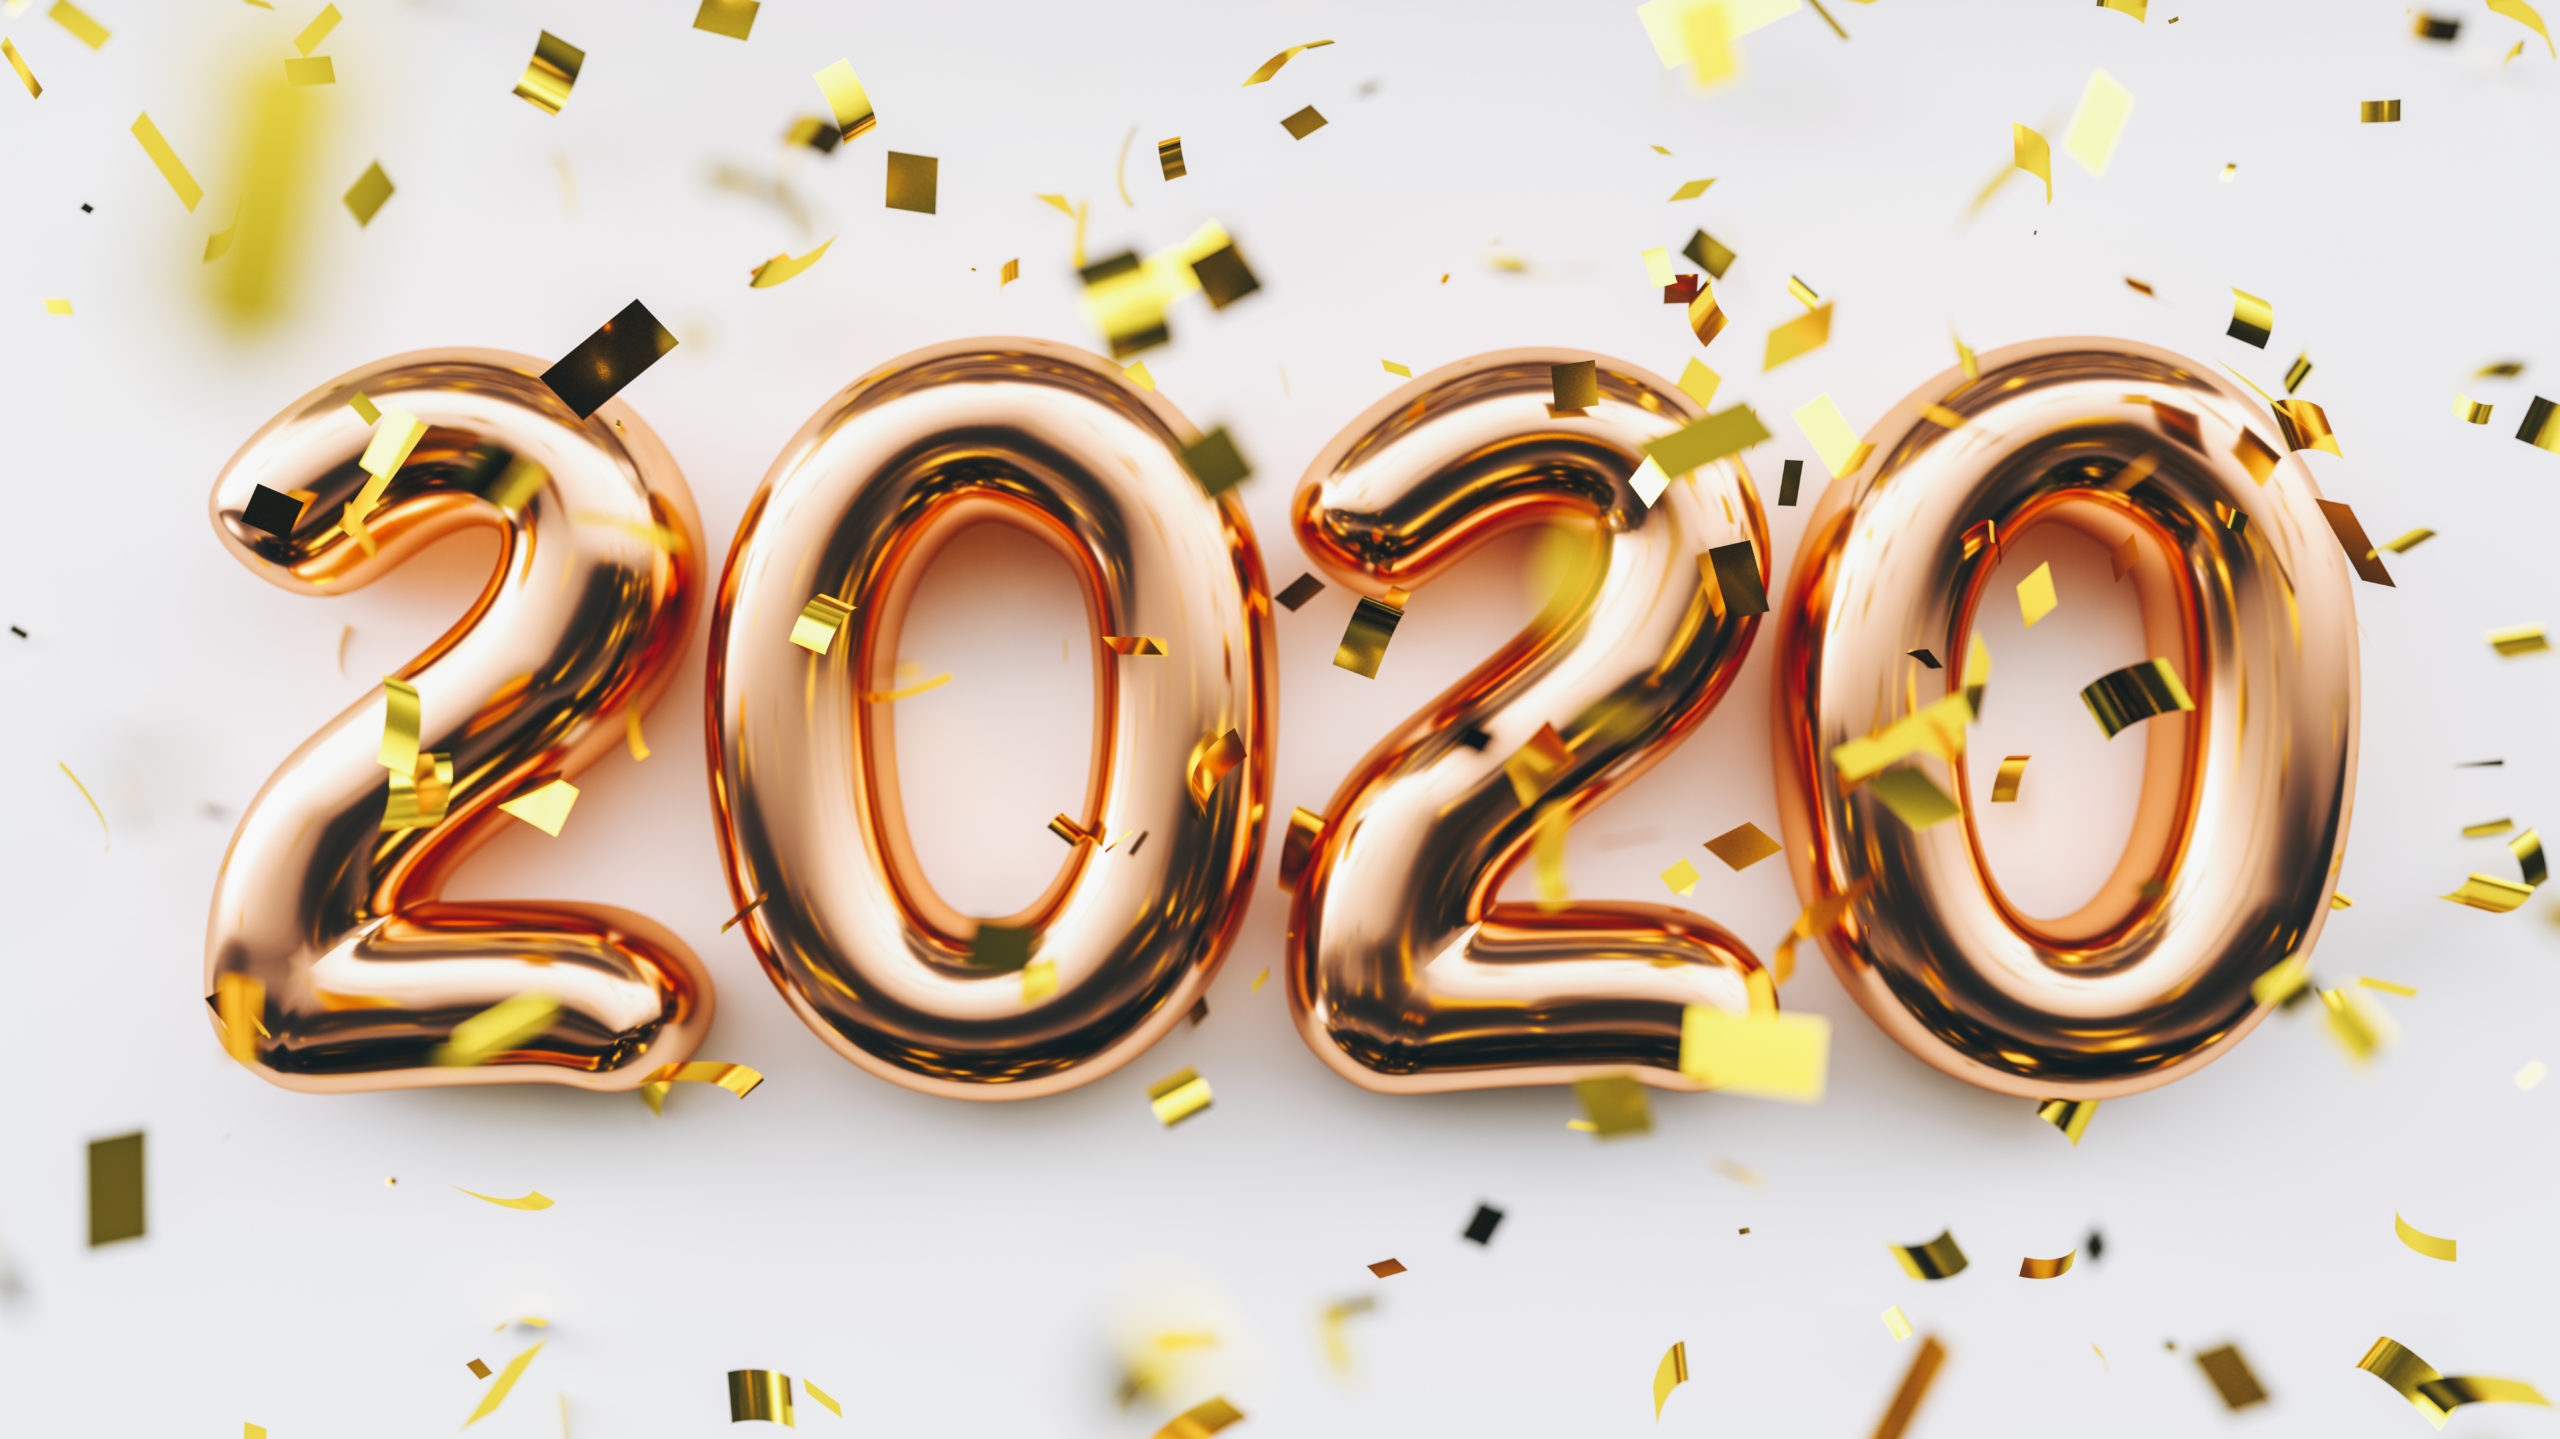 Happy New 2020 Year. Holiday copper metallic numbers 2020 and confetti on white background